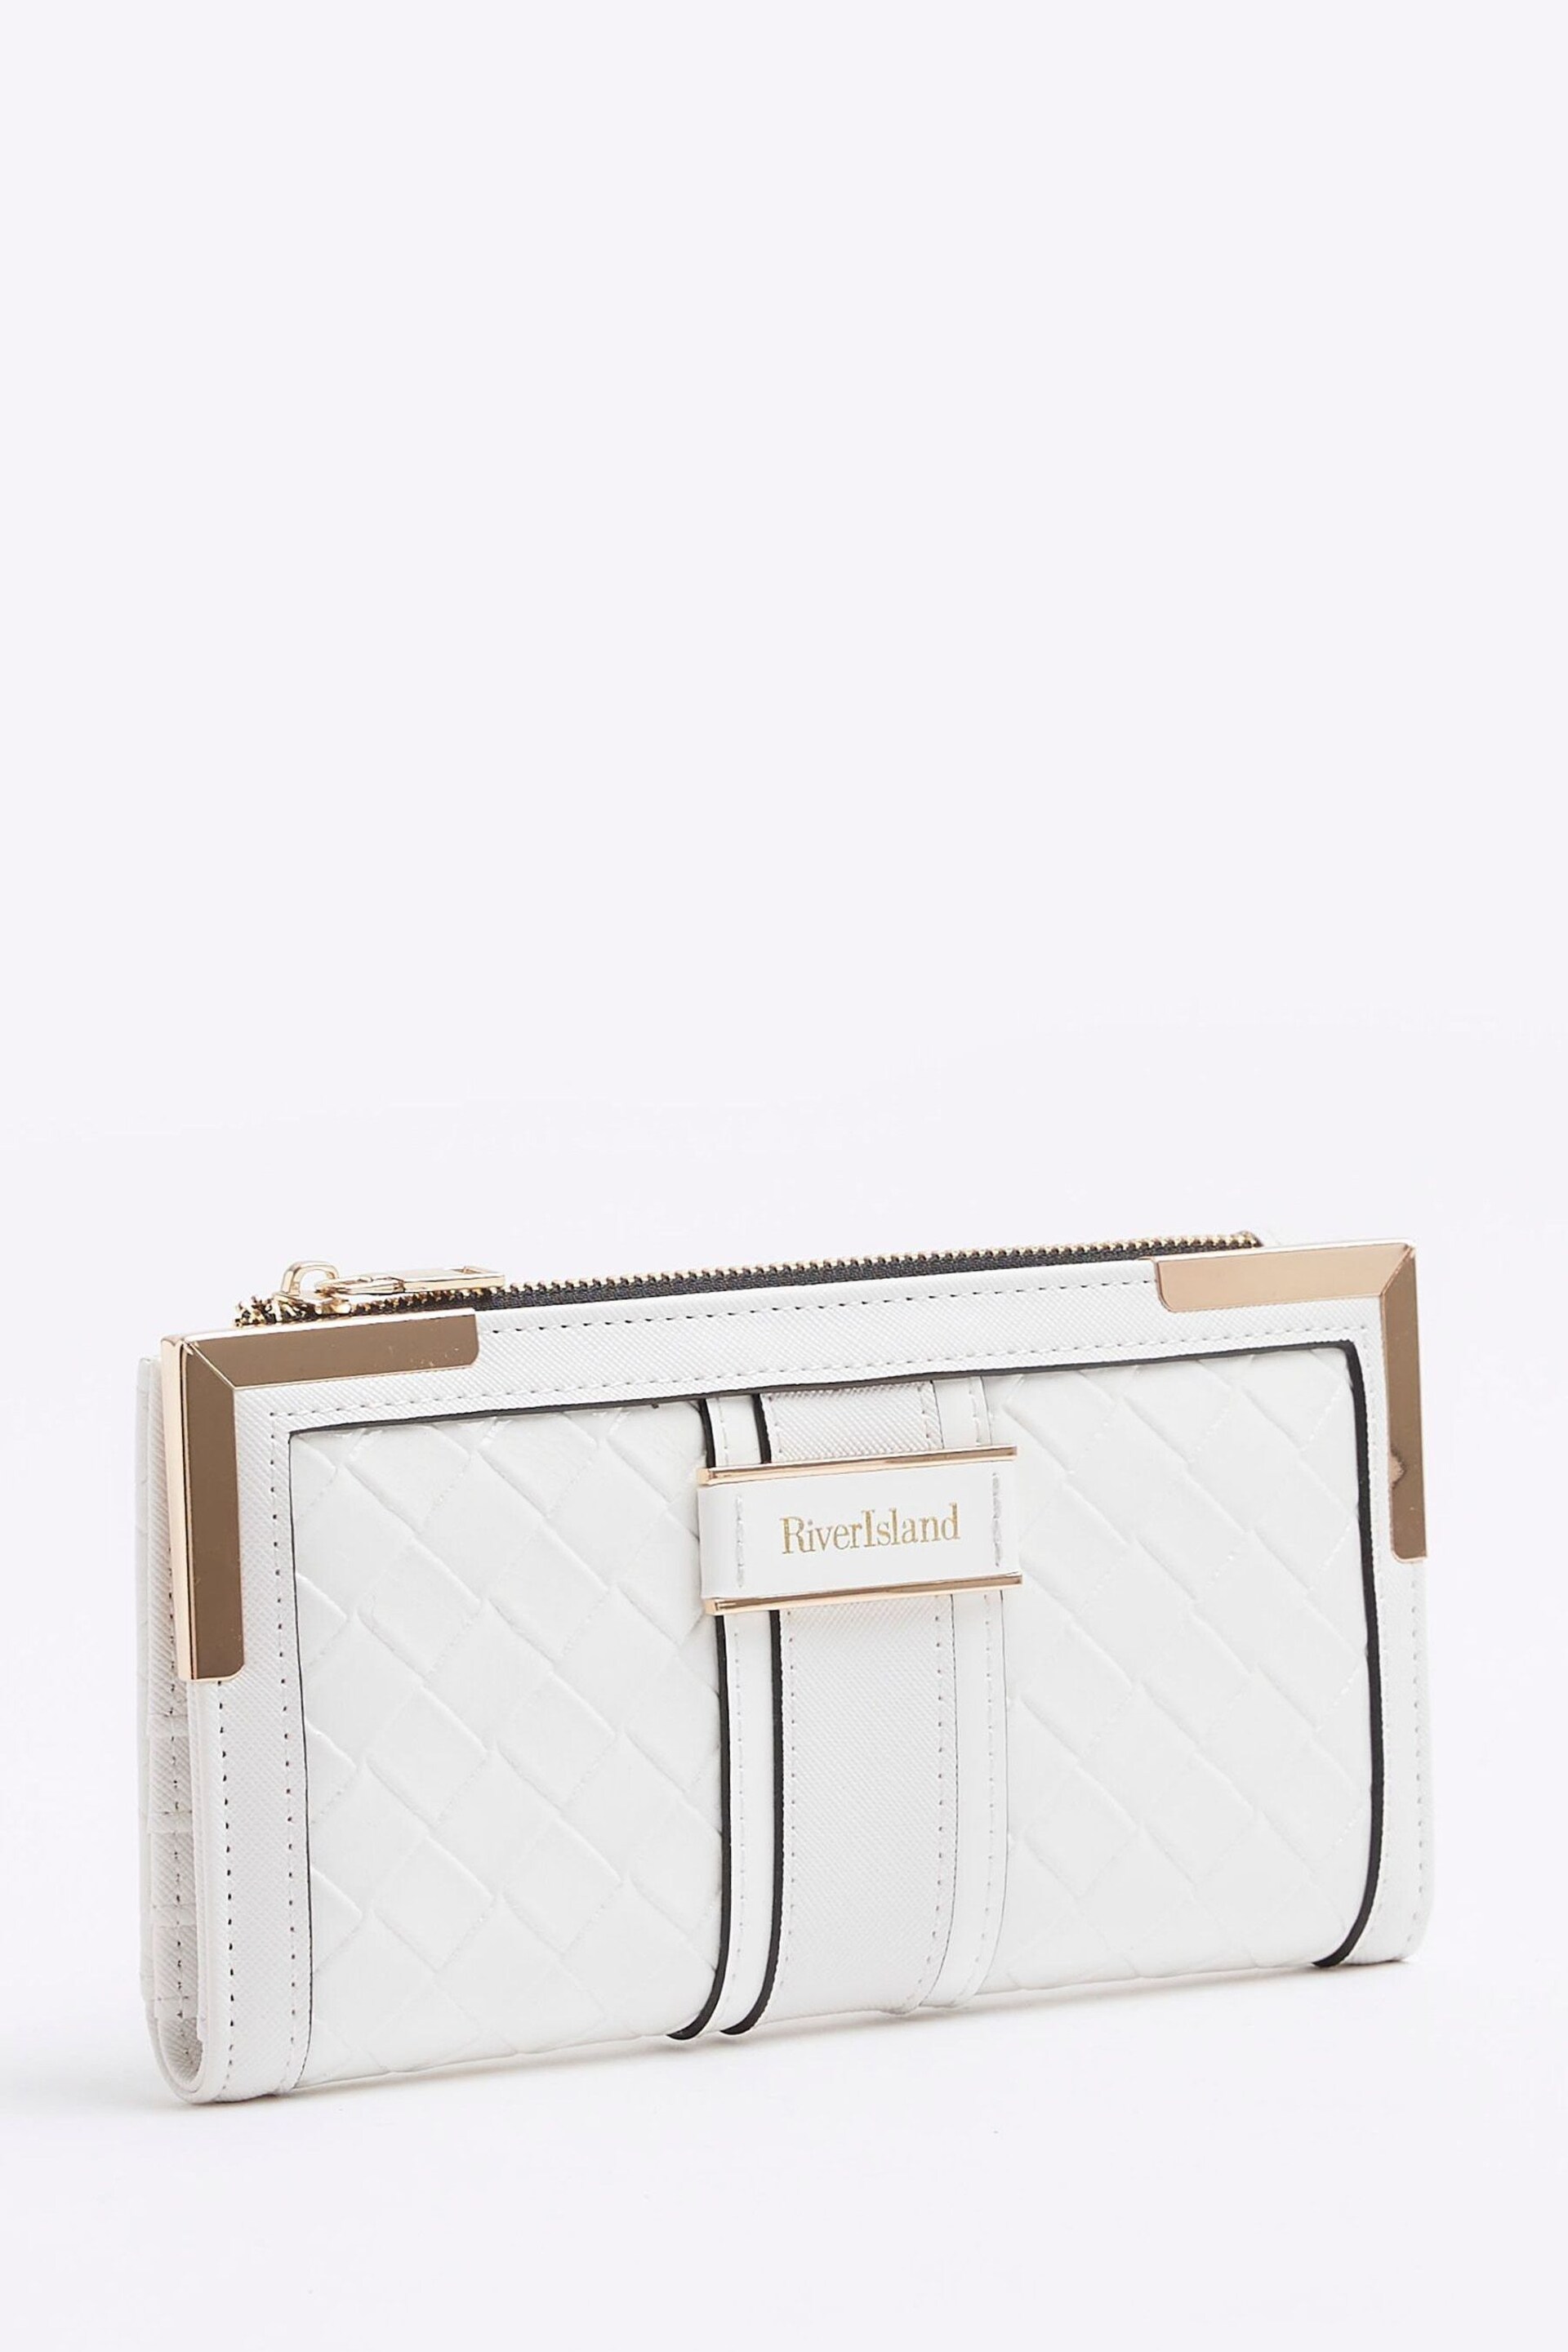 River Island White Embossed Weave Purse - Image 1 of 5